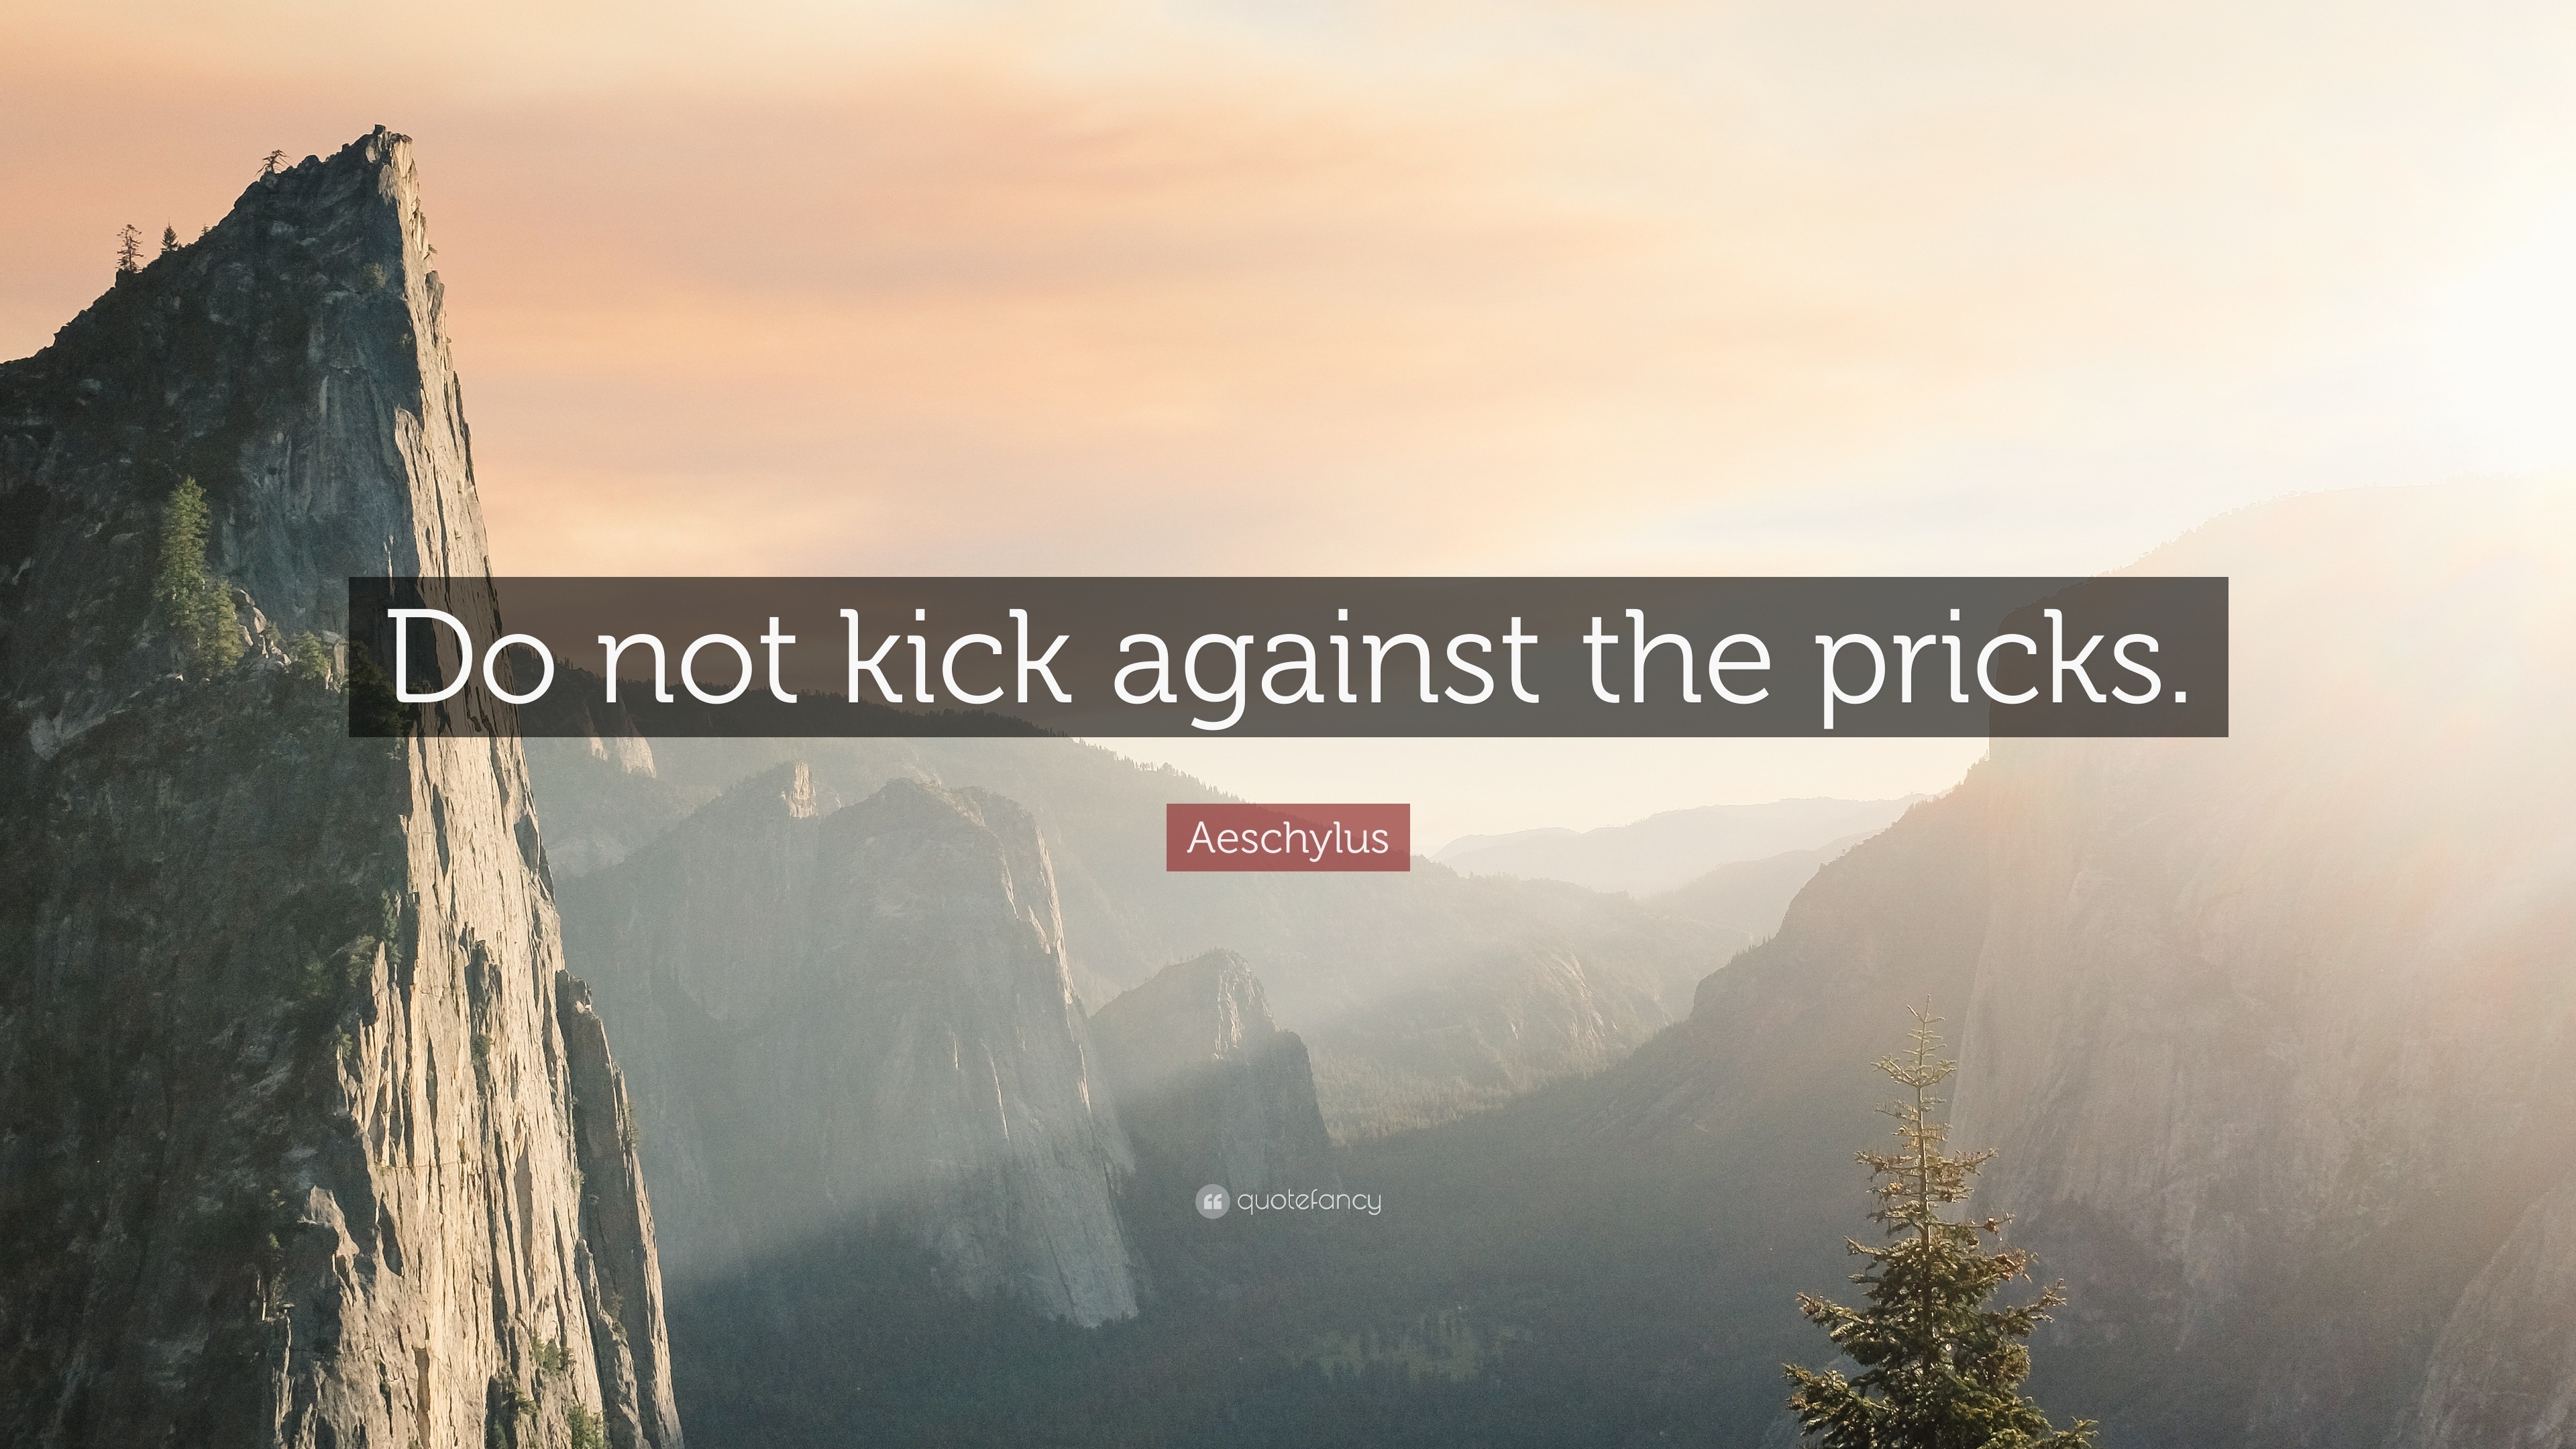 What does it mean to kick against the pricks?